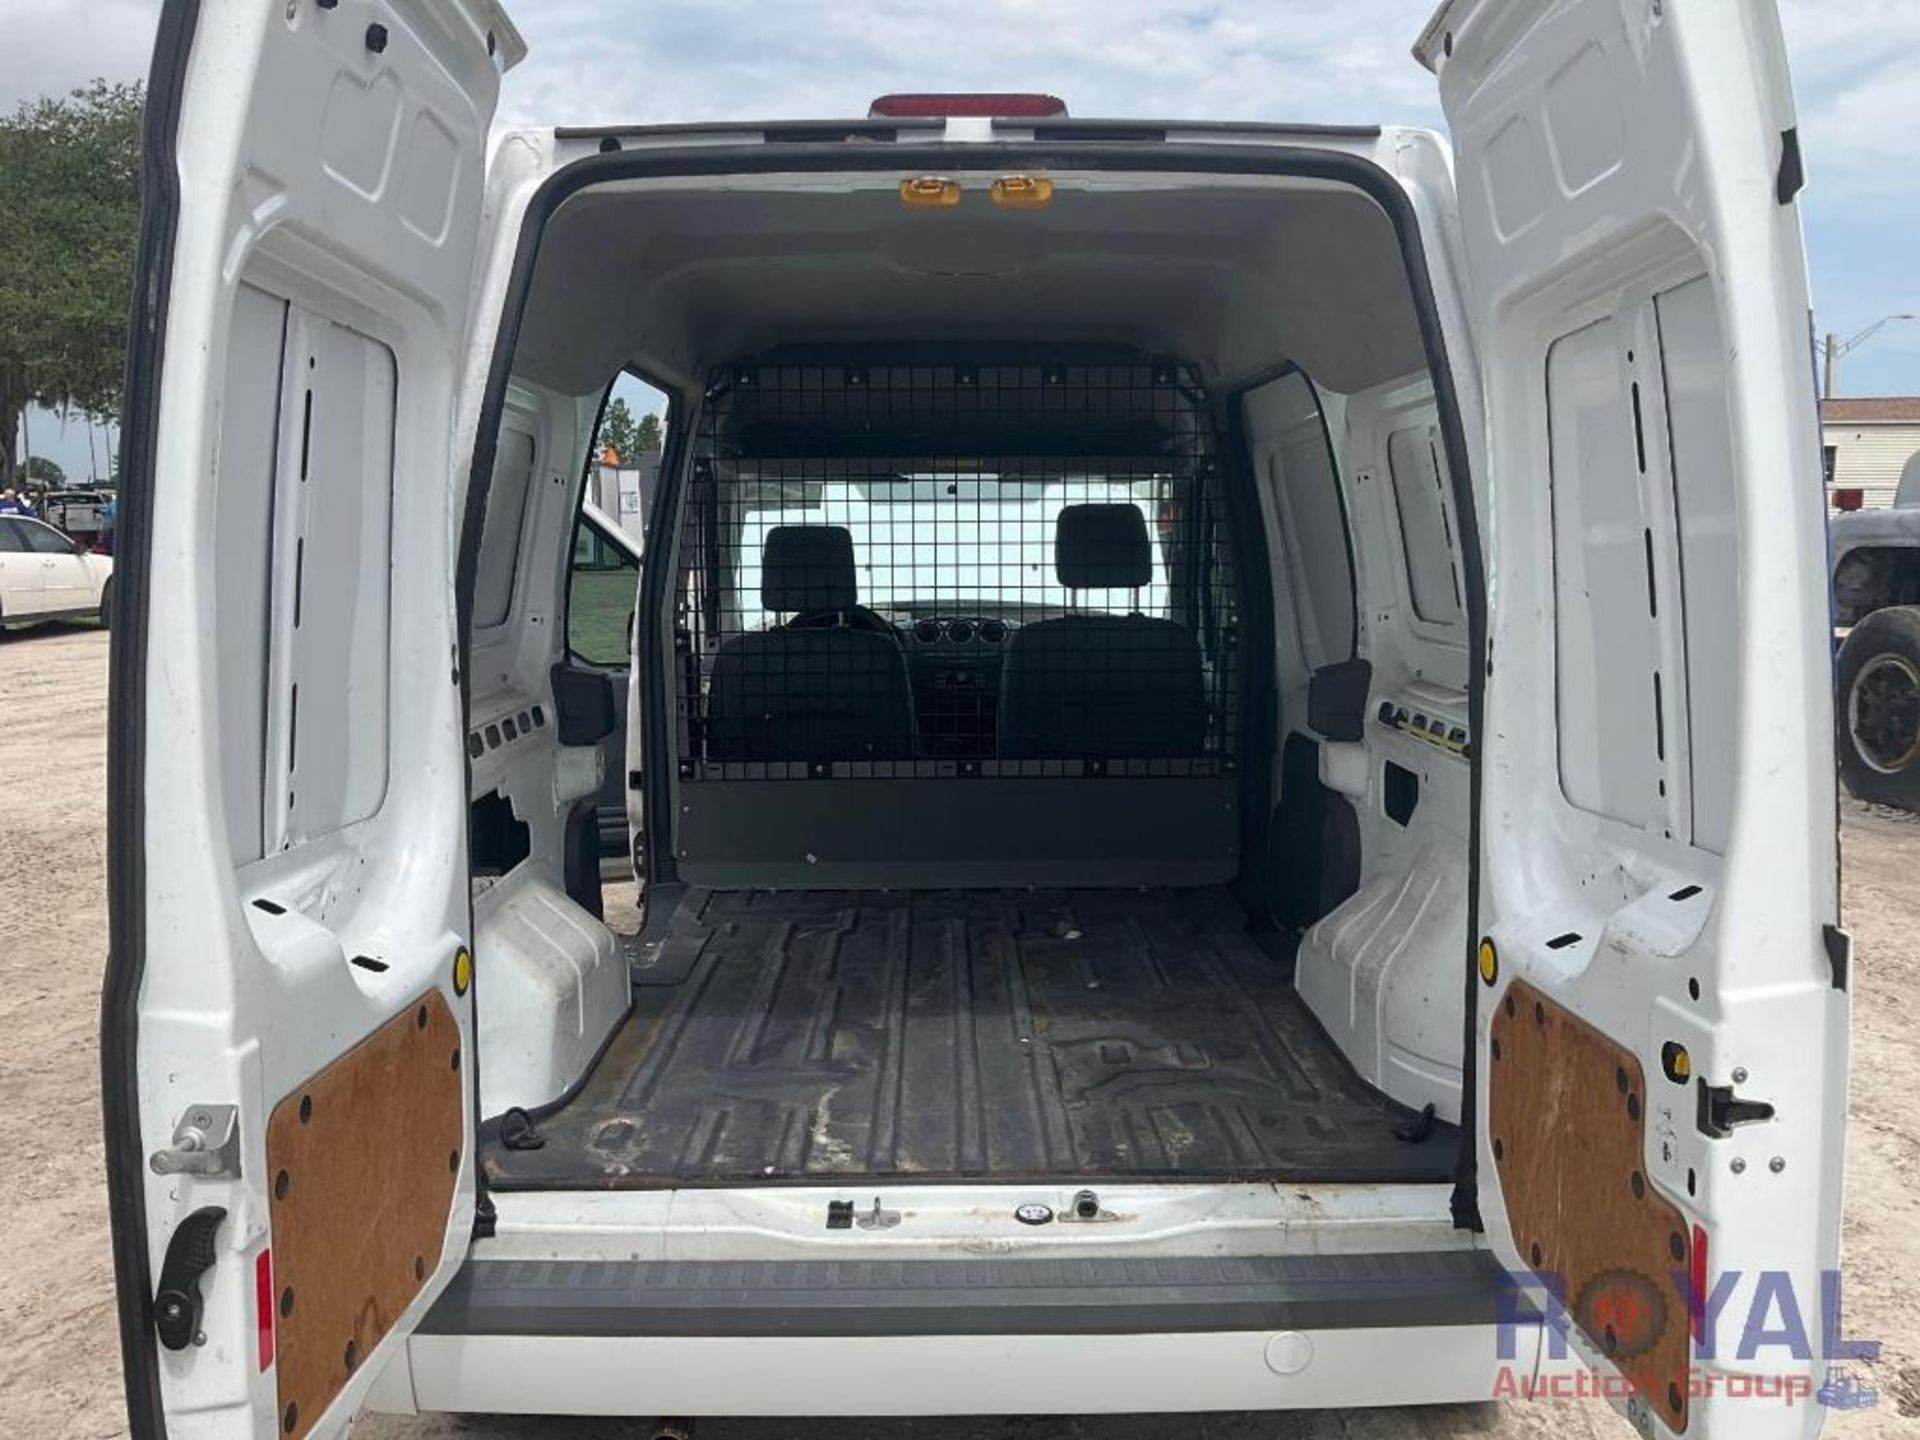 2012 Ford Transit Connect Van - Image 12 of 26